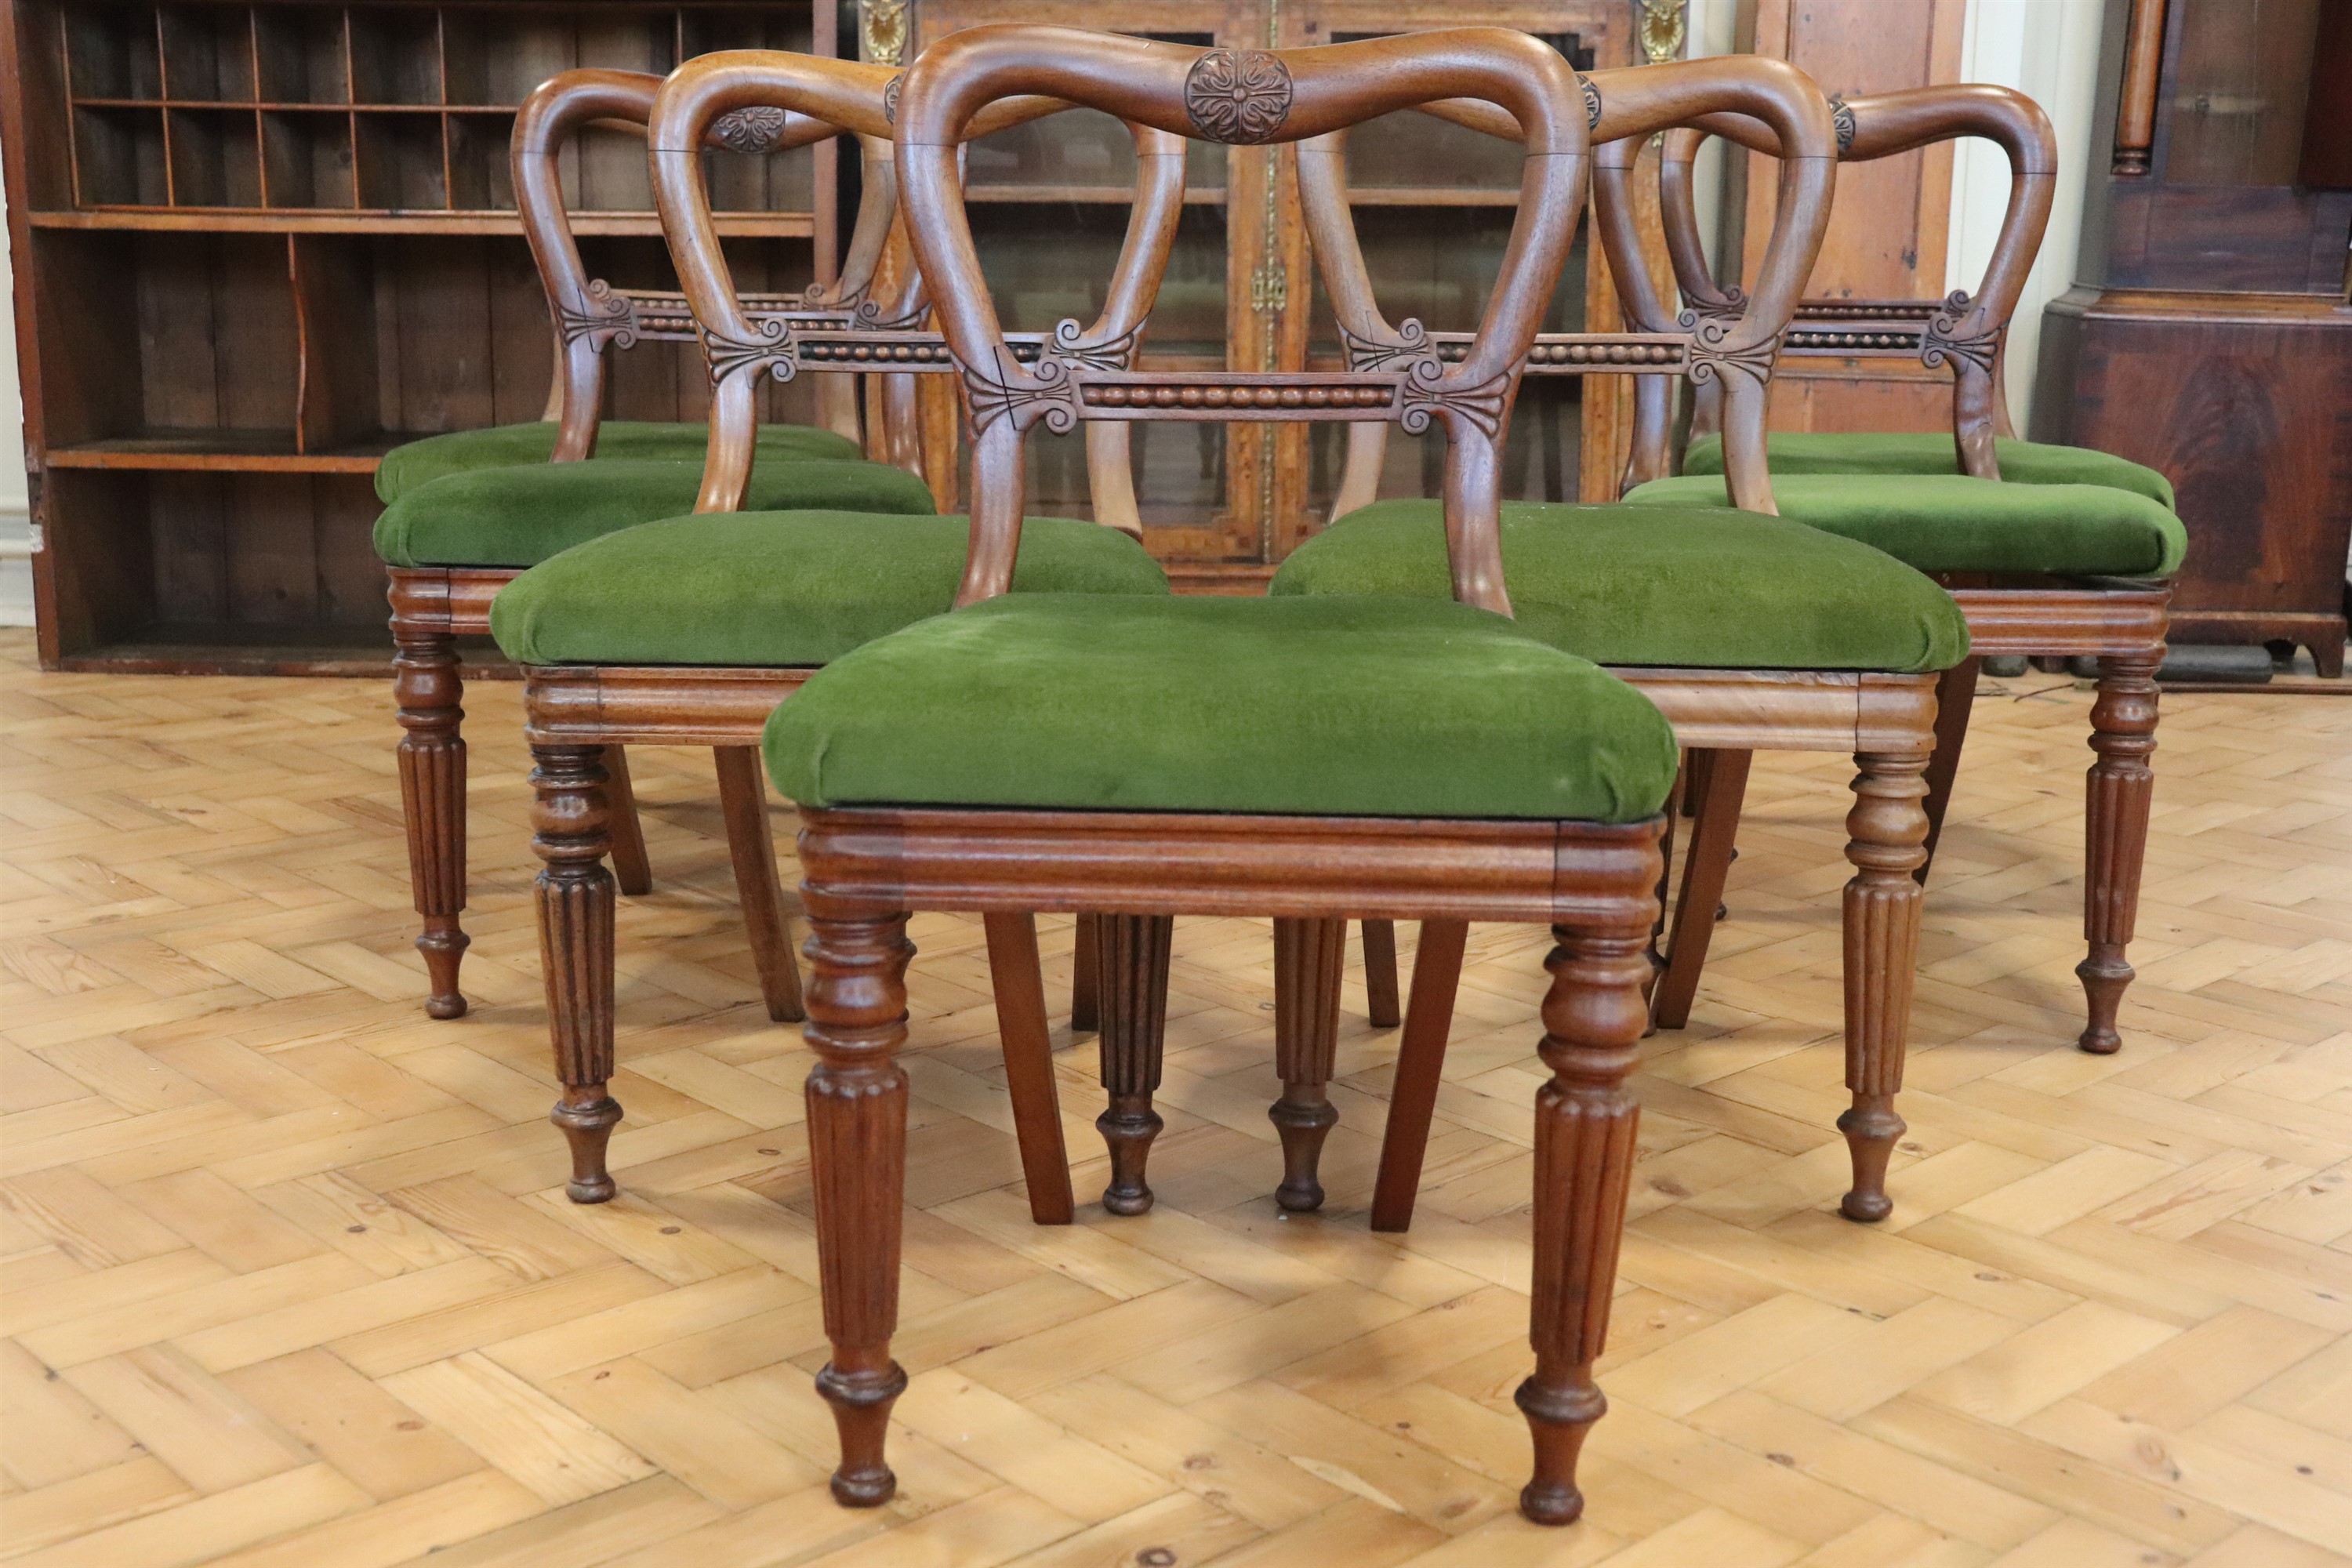 A set of seven Regency mahogany spoon back dining stand chairs, having Gillows style reeded legs and